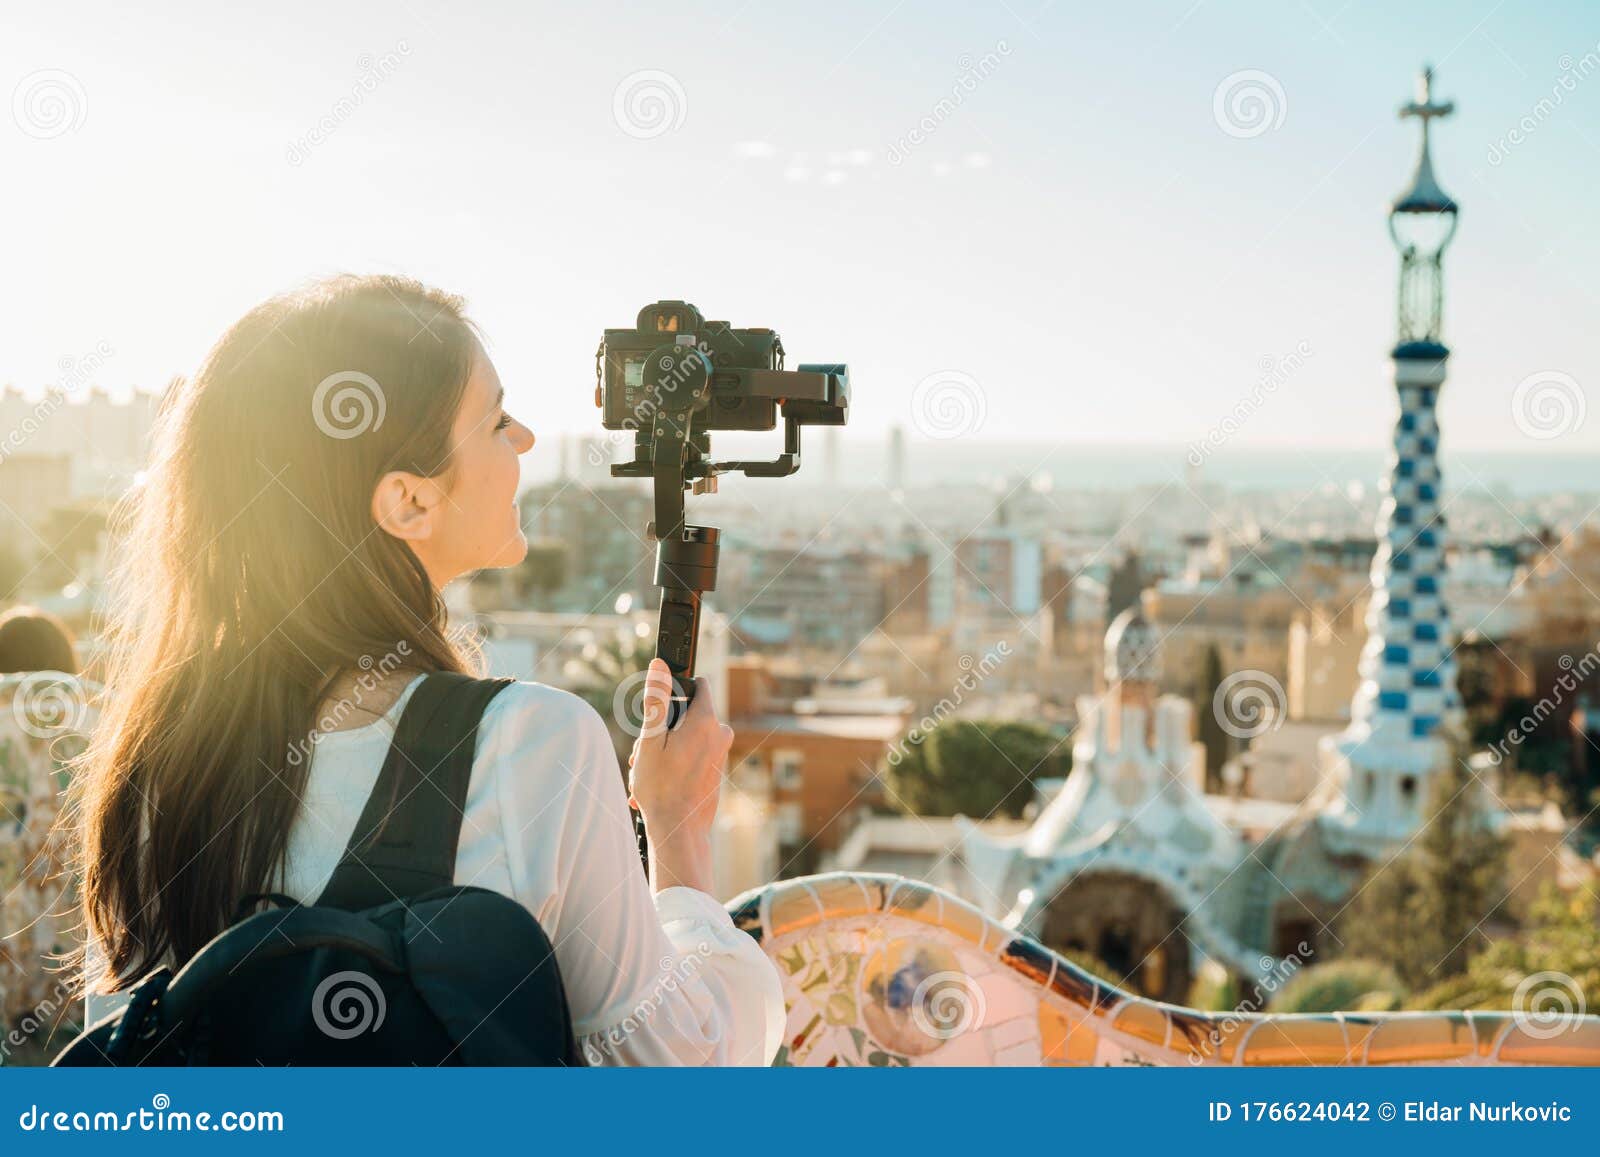 female travel photographer/videographer and bloger using camera with gimbal stabiliser crane in barcelona,spain.travel photography